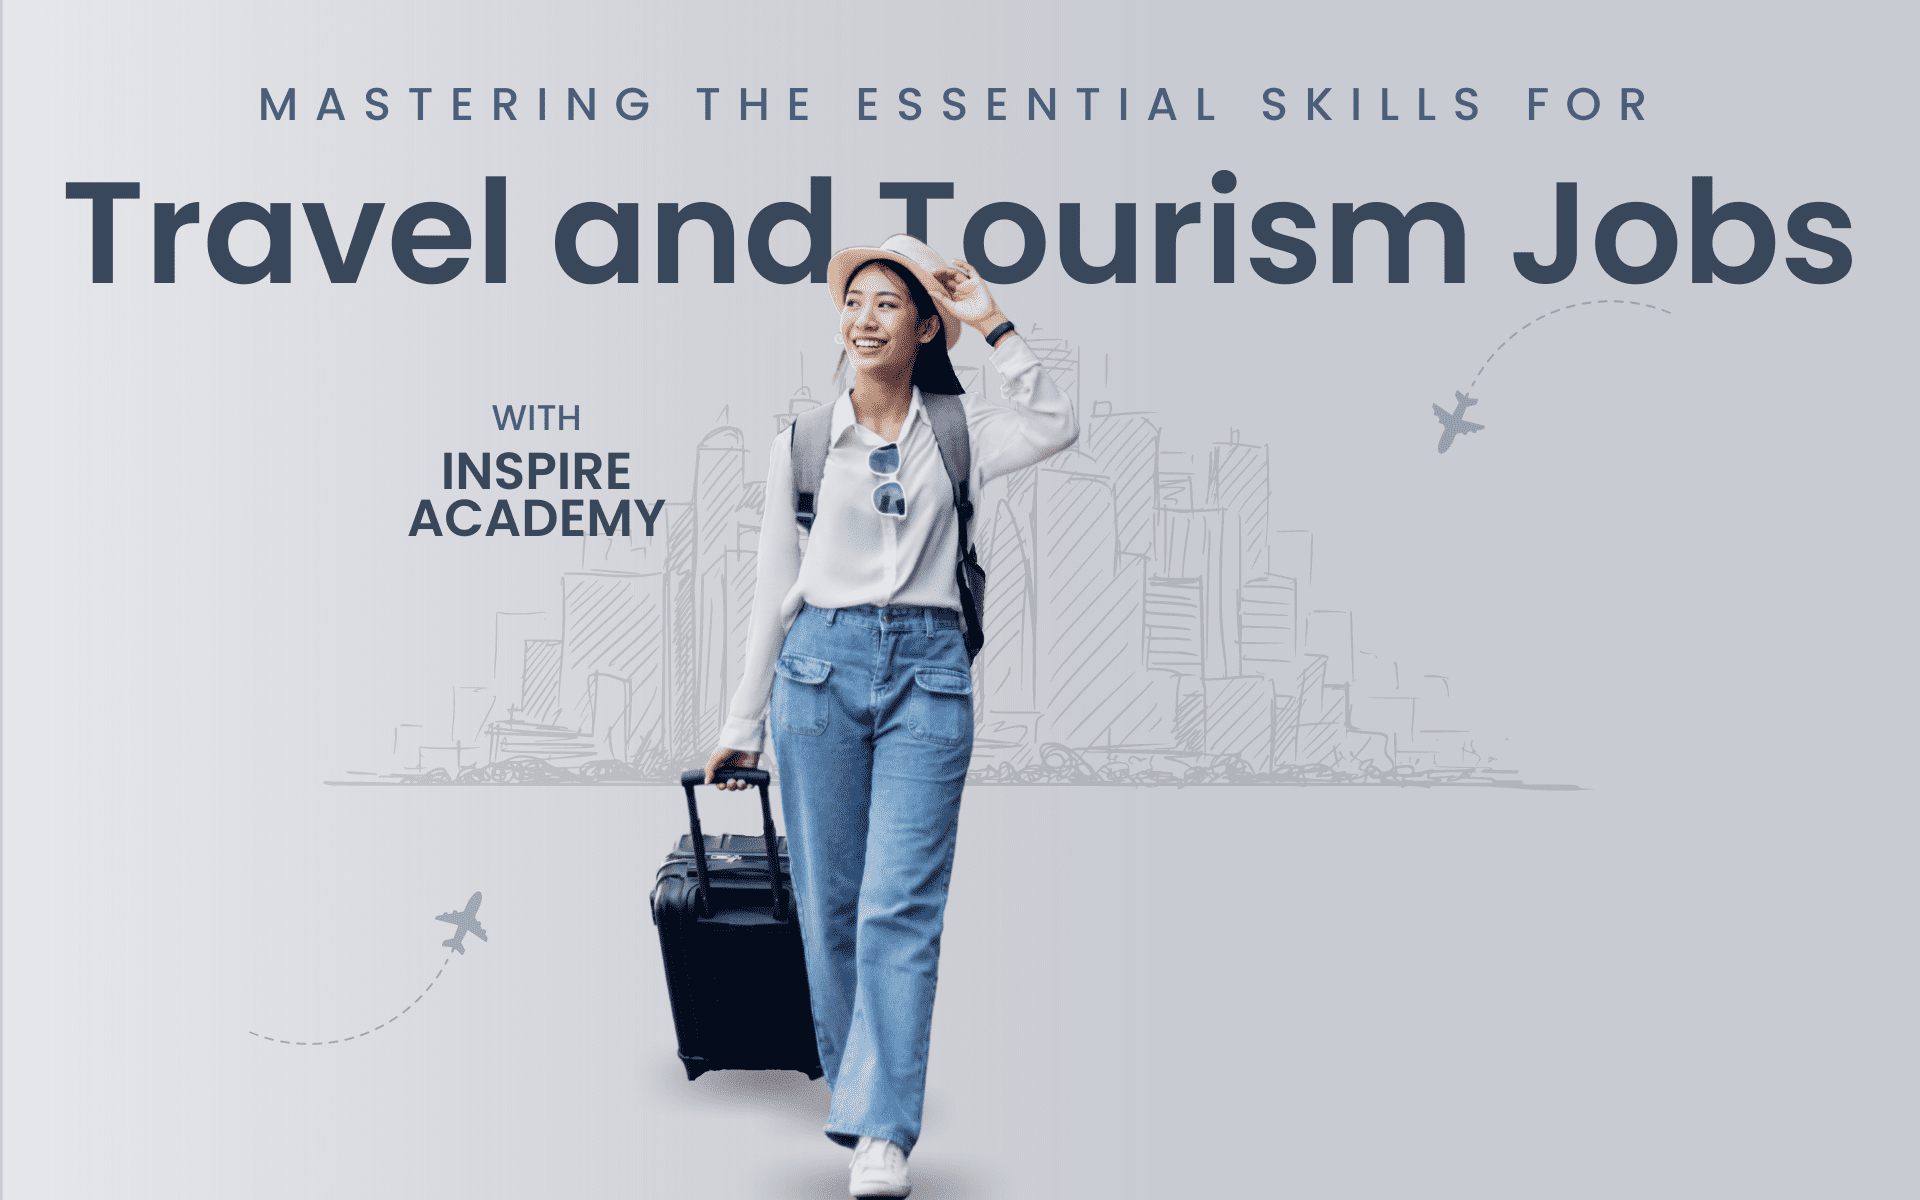 Mastering the Essential Skills for Travel and Tourism Jobs